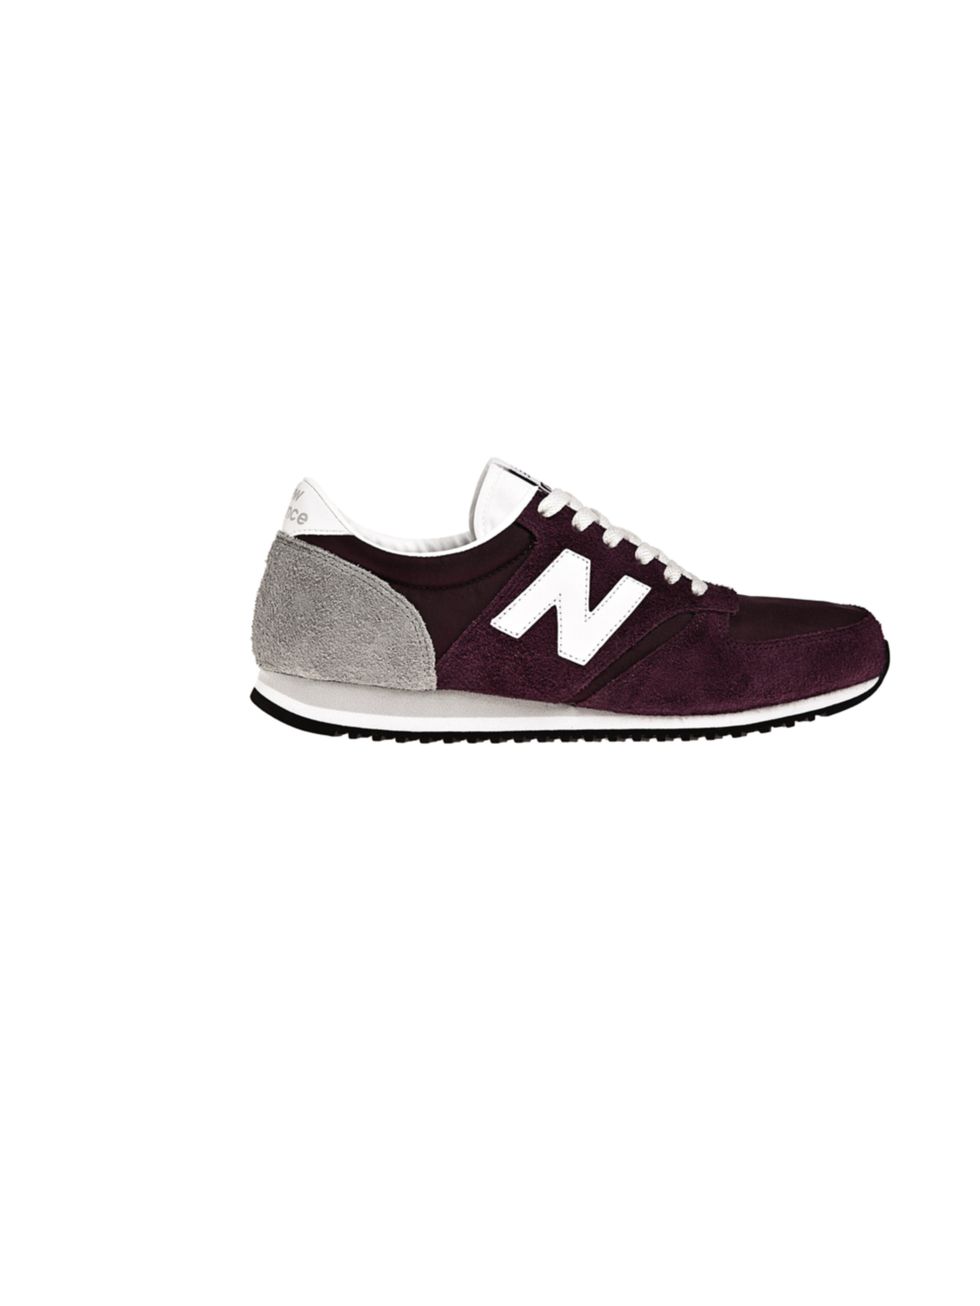 <p>New Balance burgundy 420 running shoes, £57, at <a href="http://www.urbanoutfitters.co.uk/">Urban Outfitters</a></p>